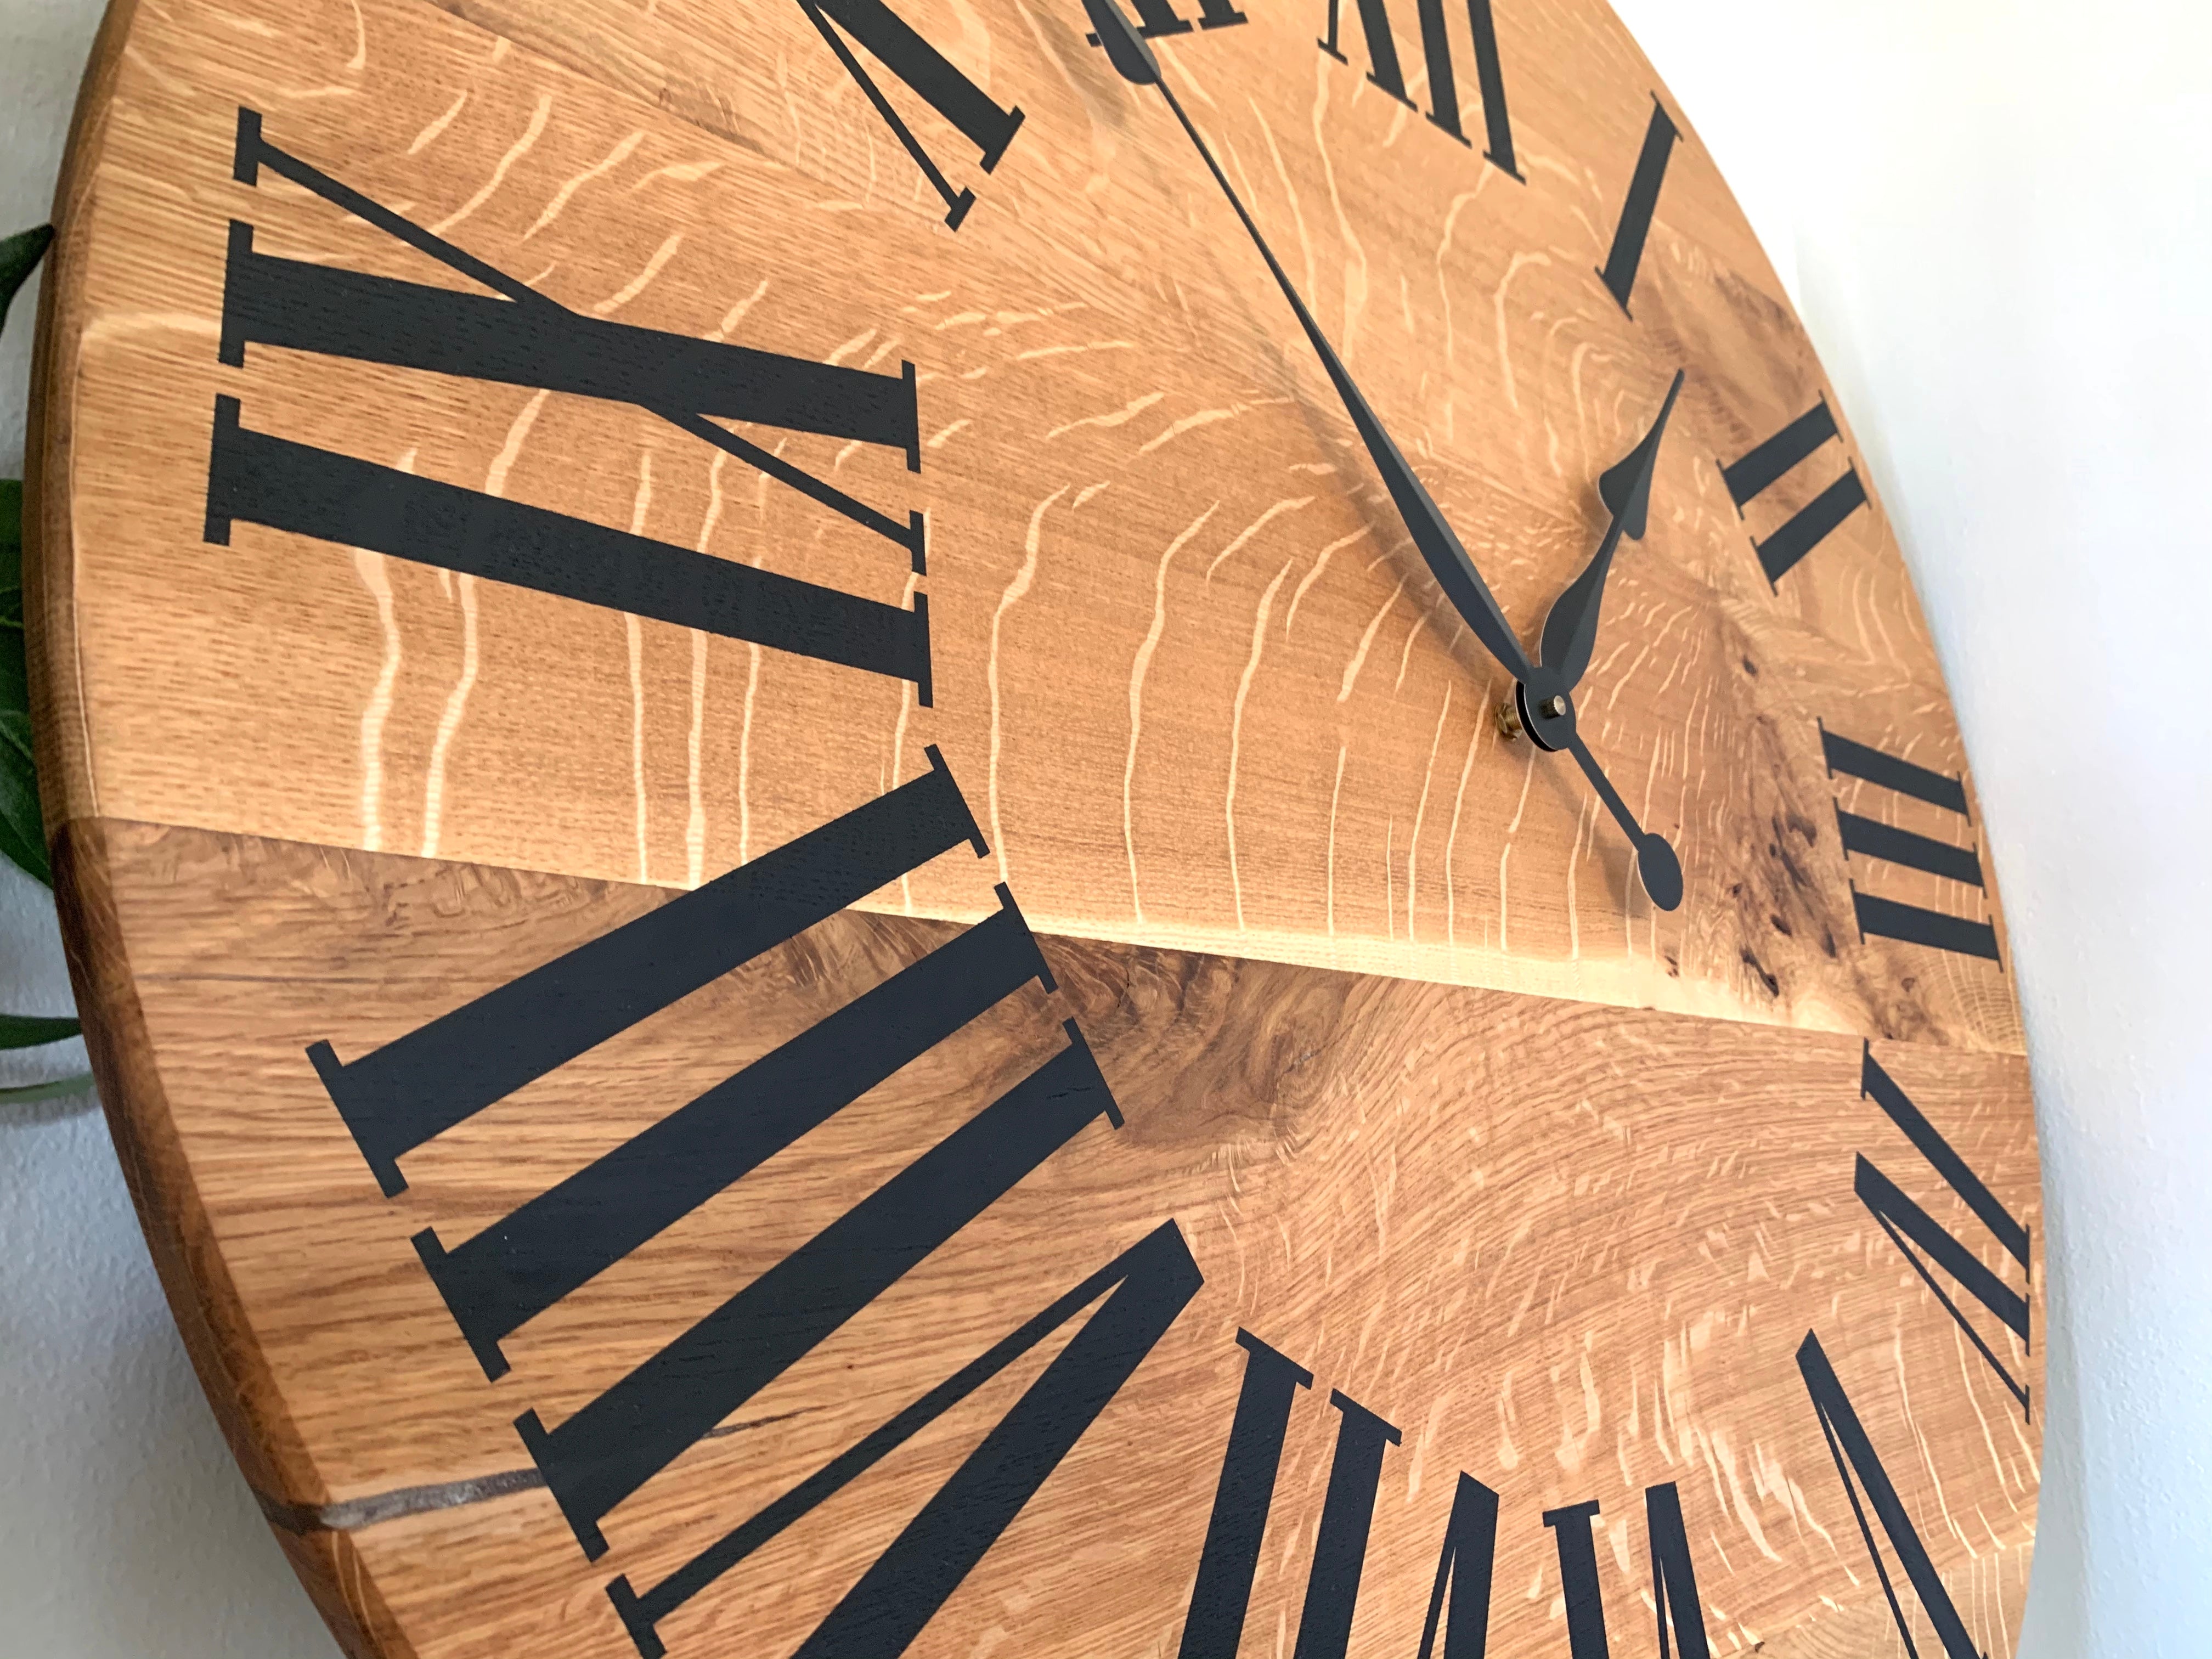 Large Quartersawn White Oak Wall Clock with and Roman Numerals